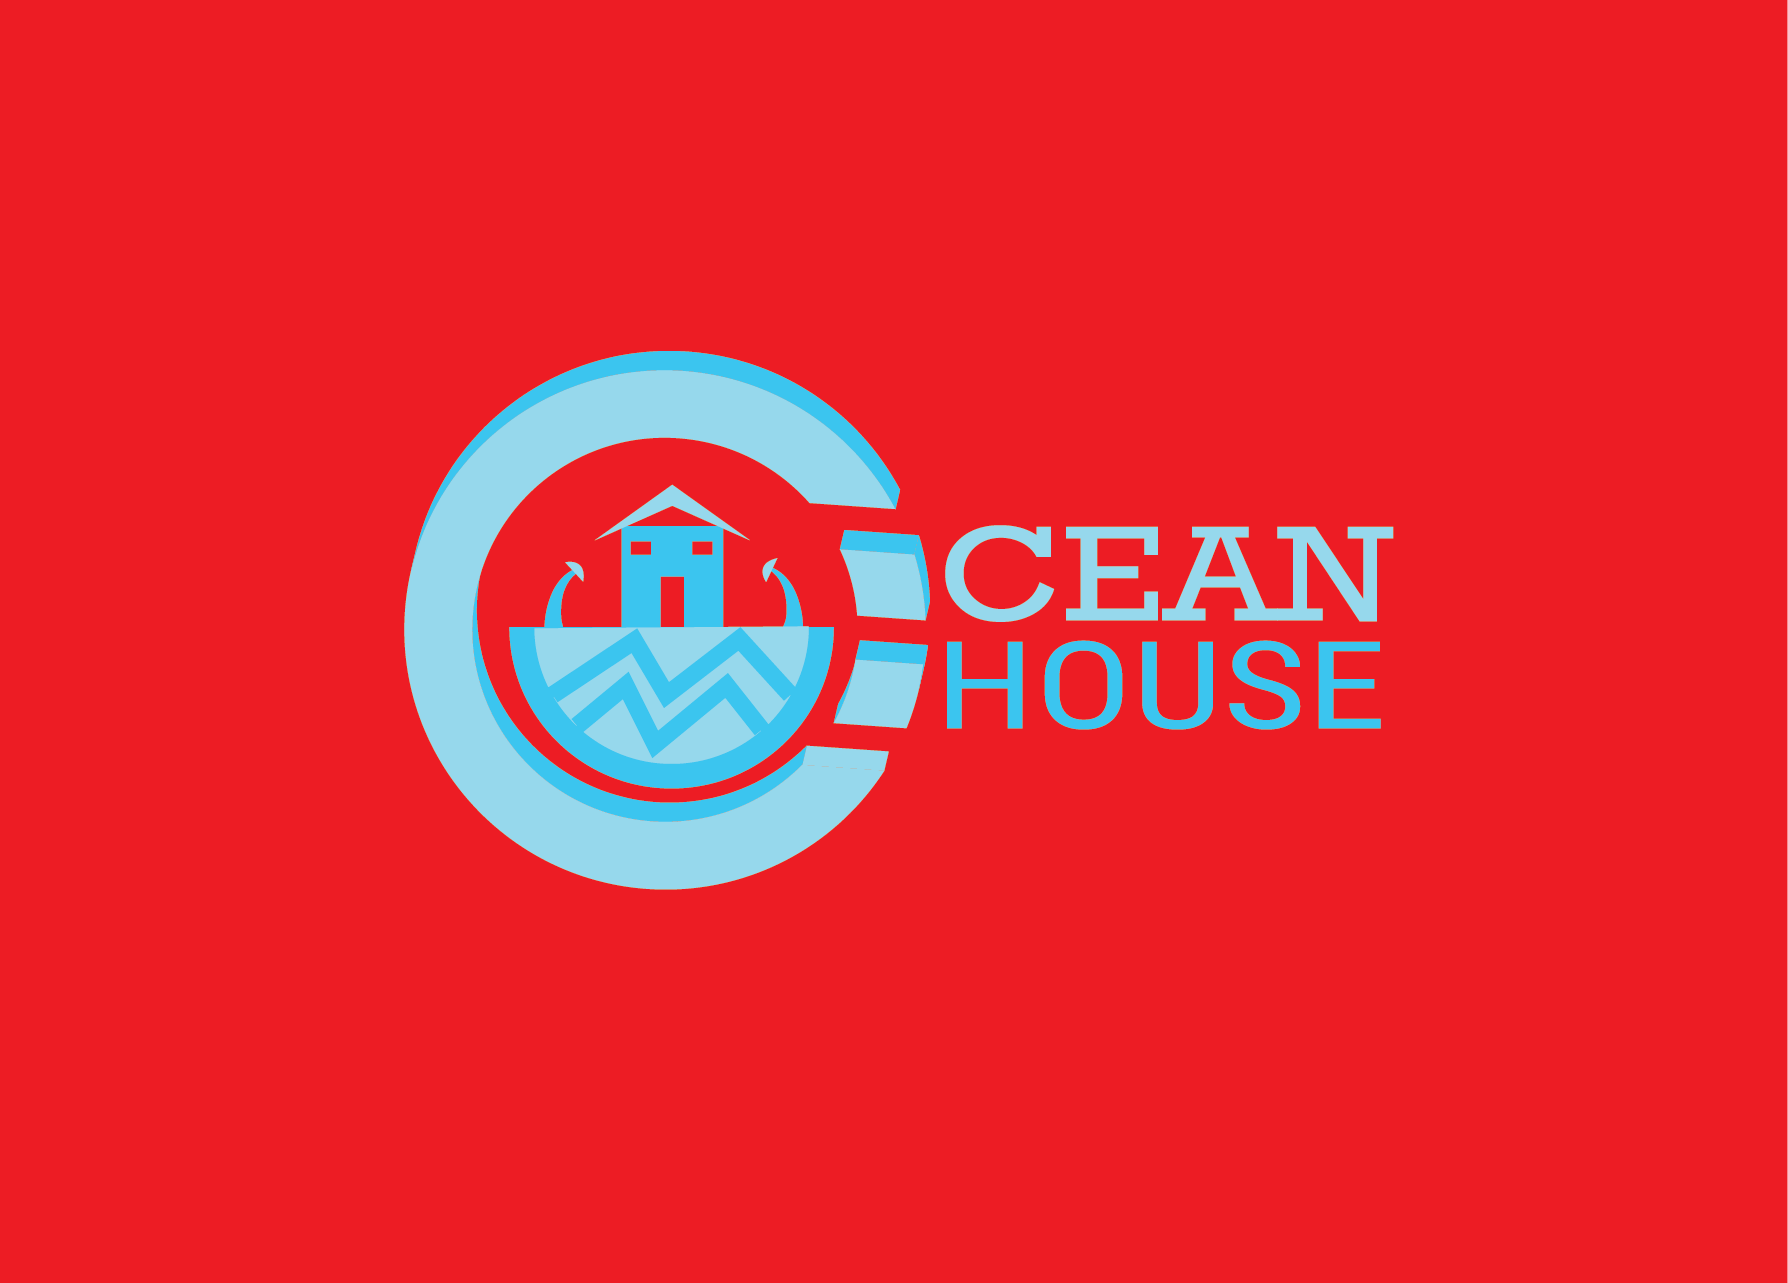 Red and Blue House Logo - abstract Ocean House logo design